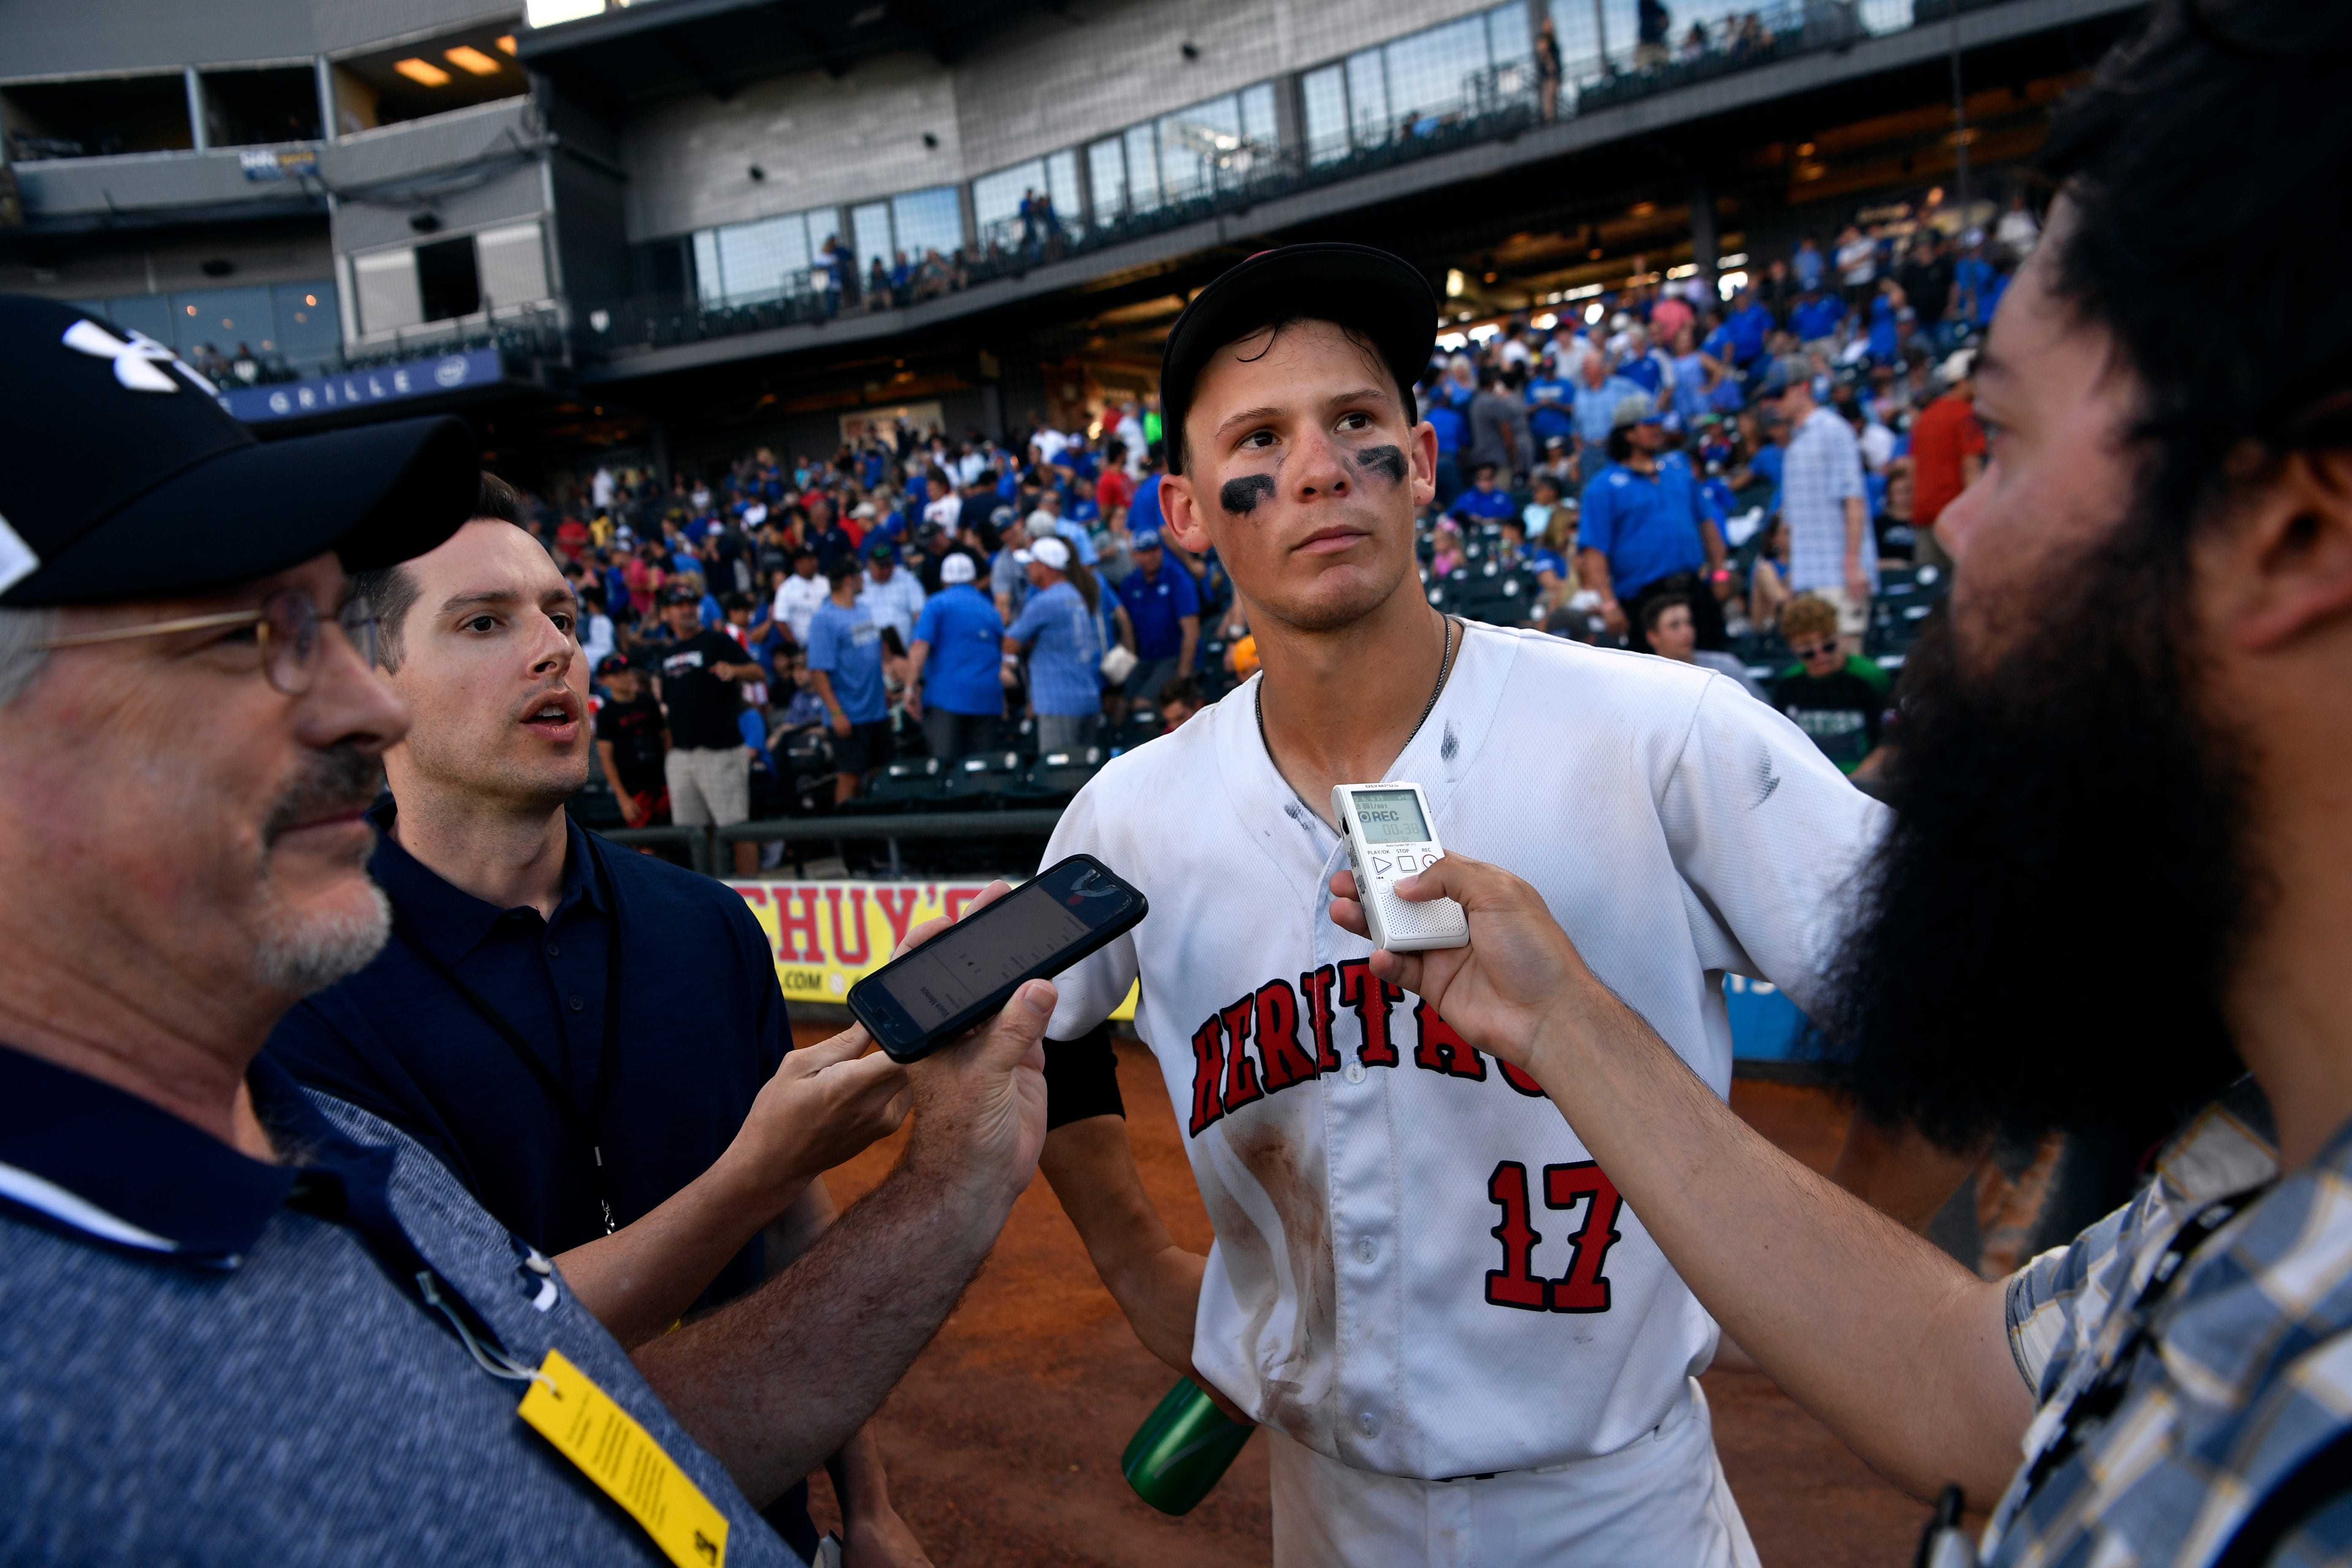 Bobby Witt Jr. leads team to state championship appearance